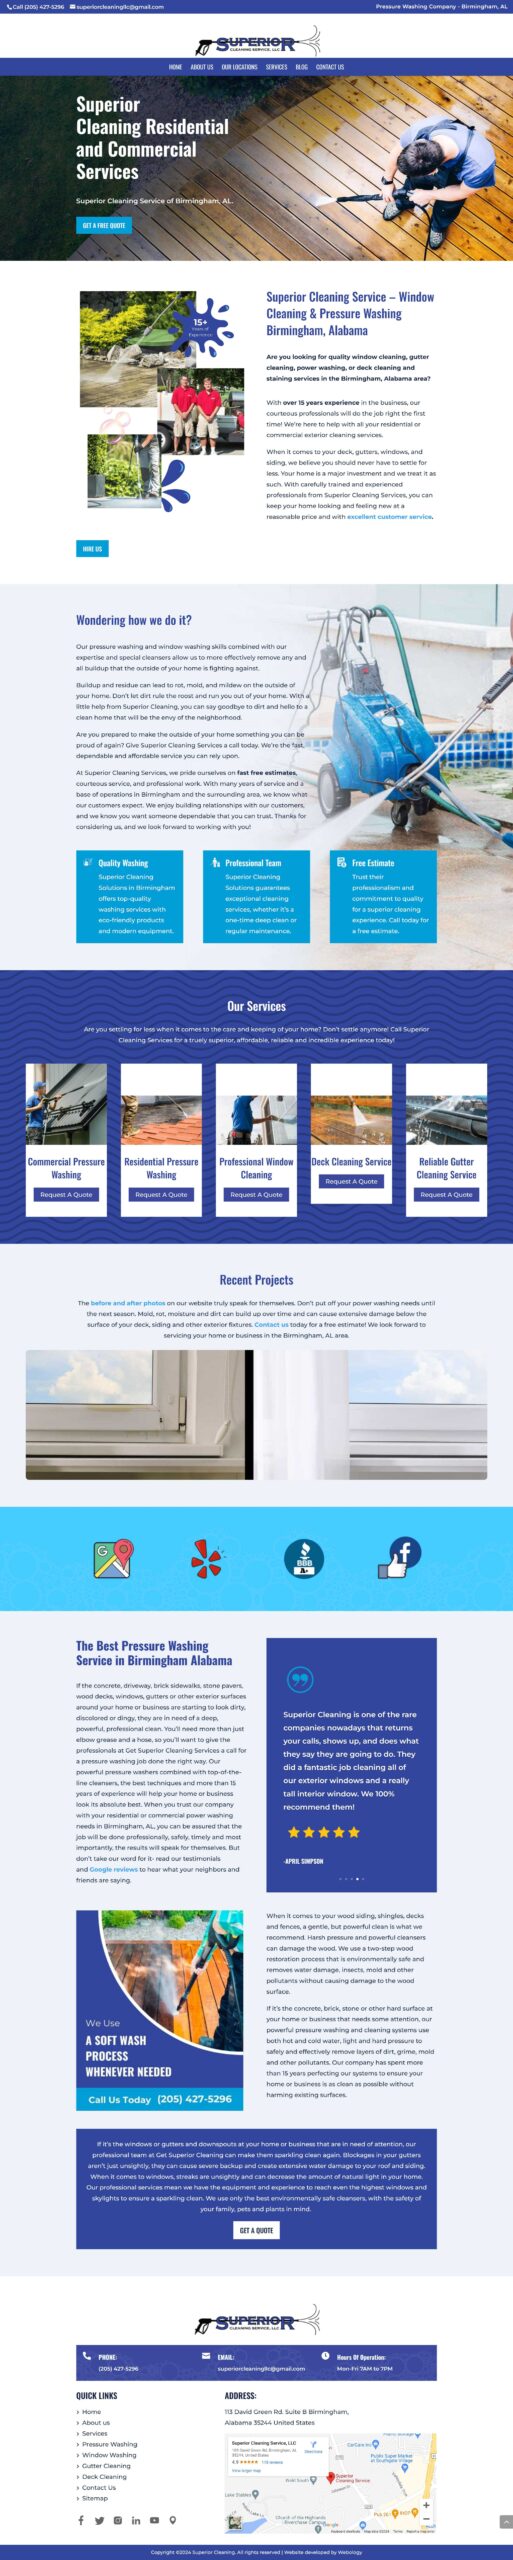 Cleaning Company Website Example